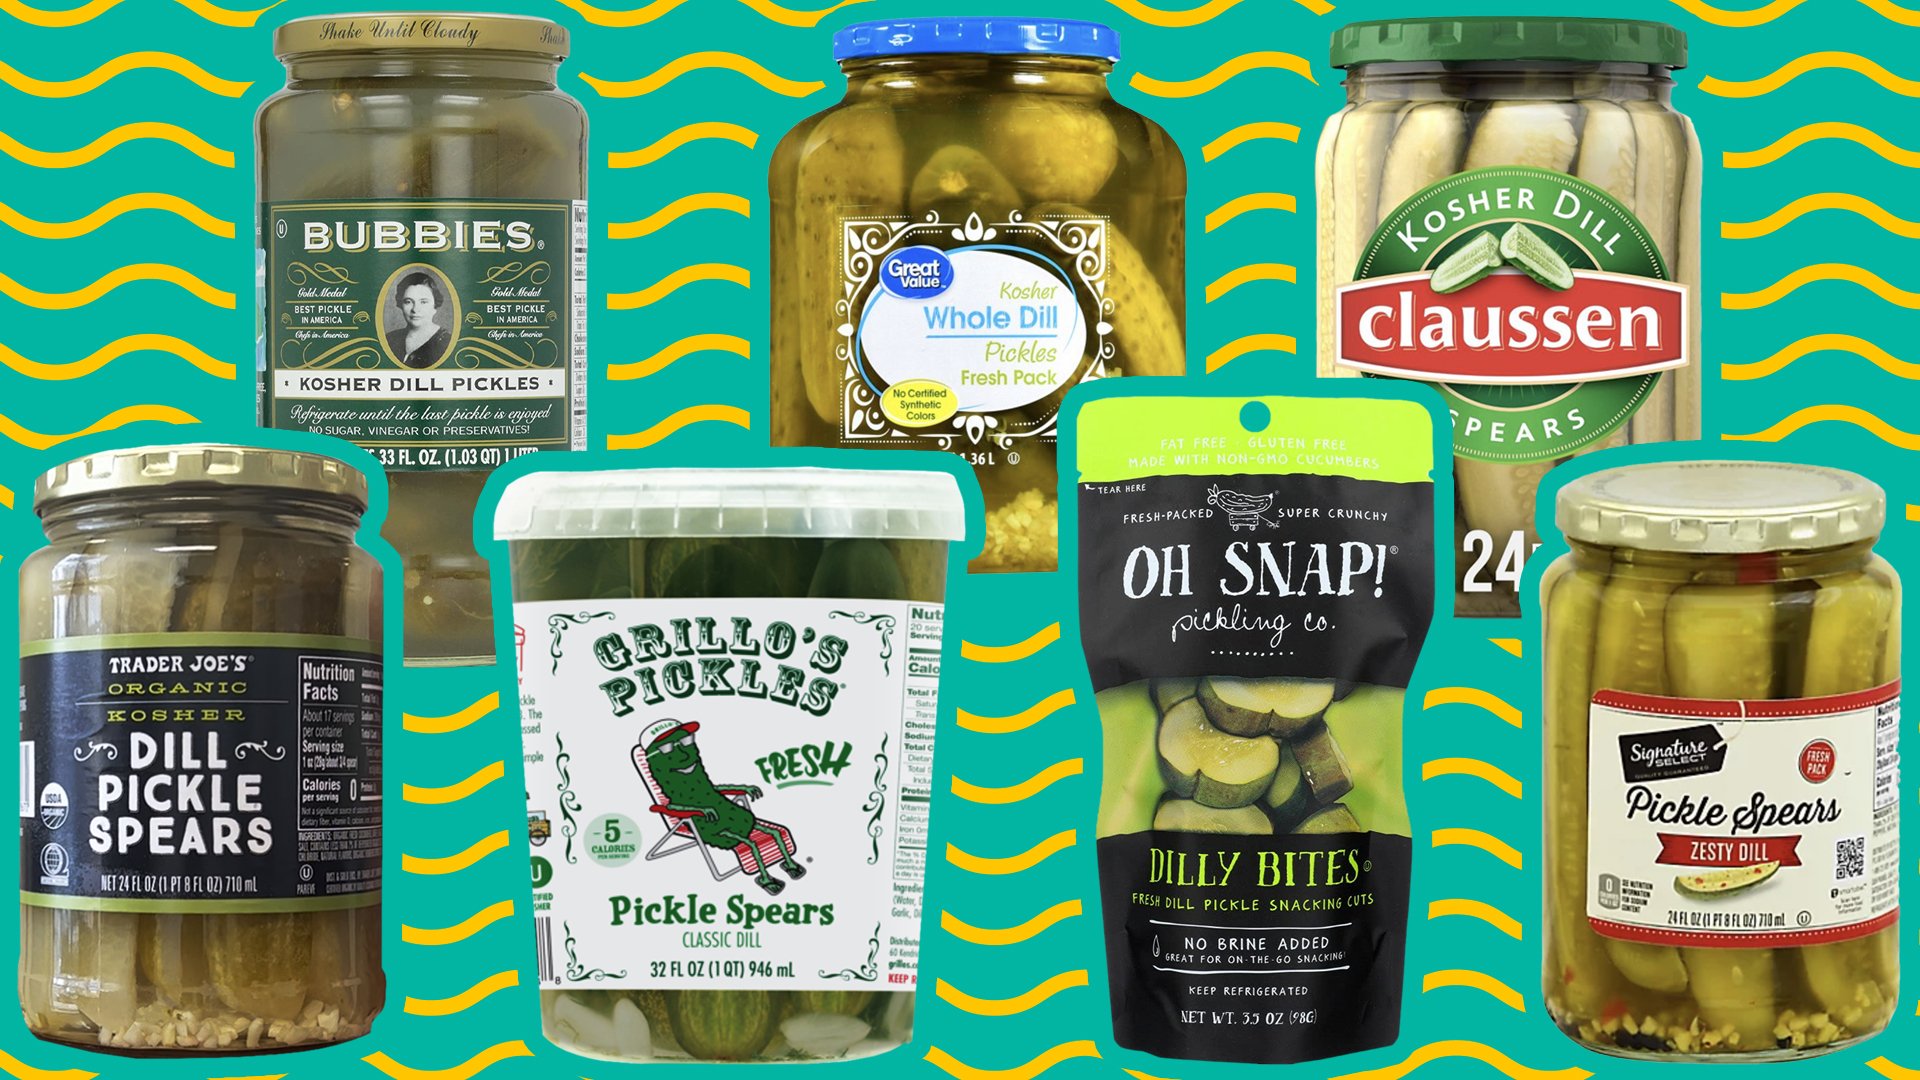 They’re Not Just the Best Pickles on the Market, They’re a Big Dill